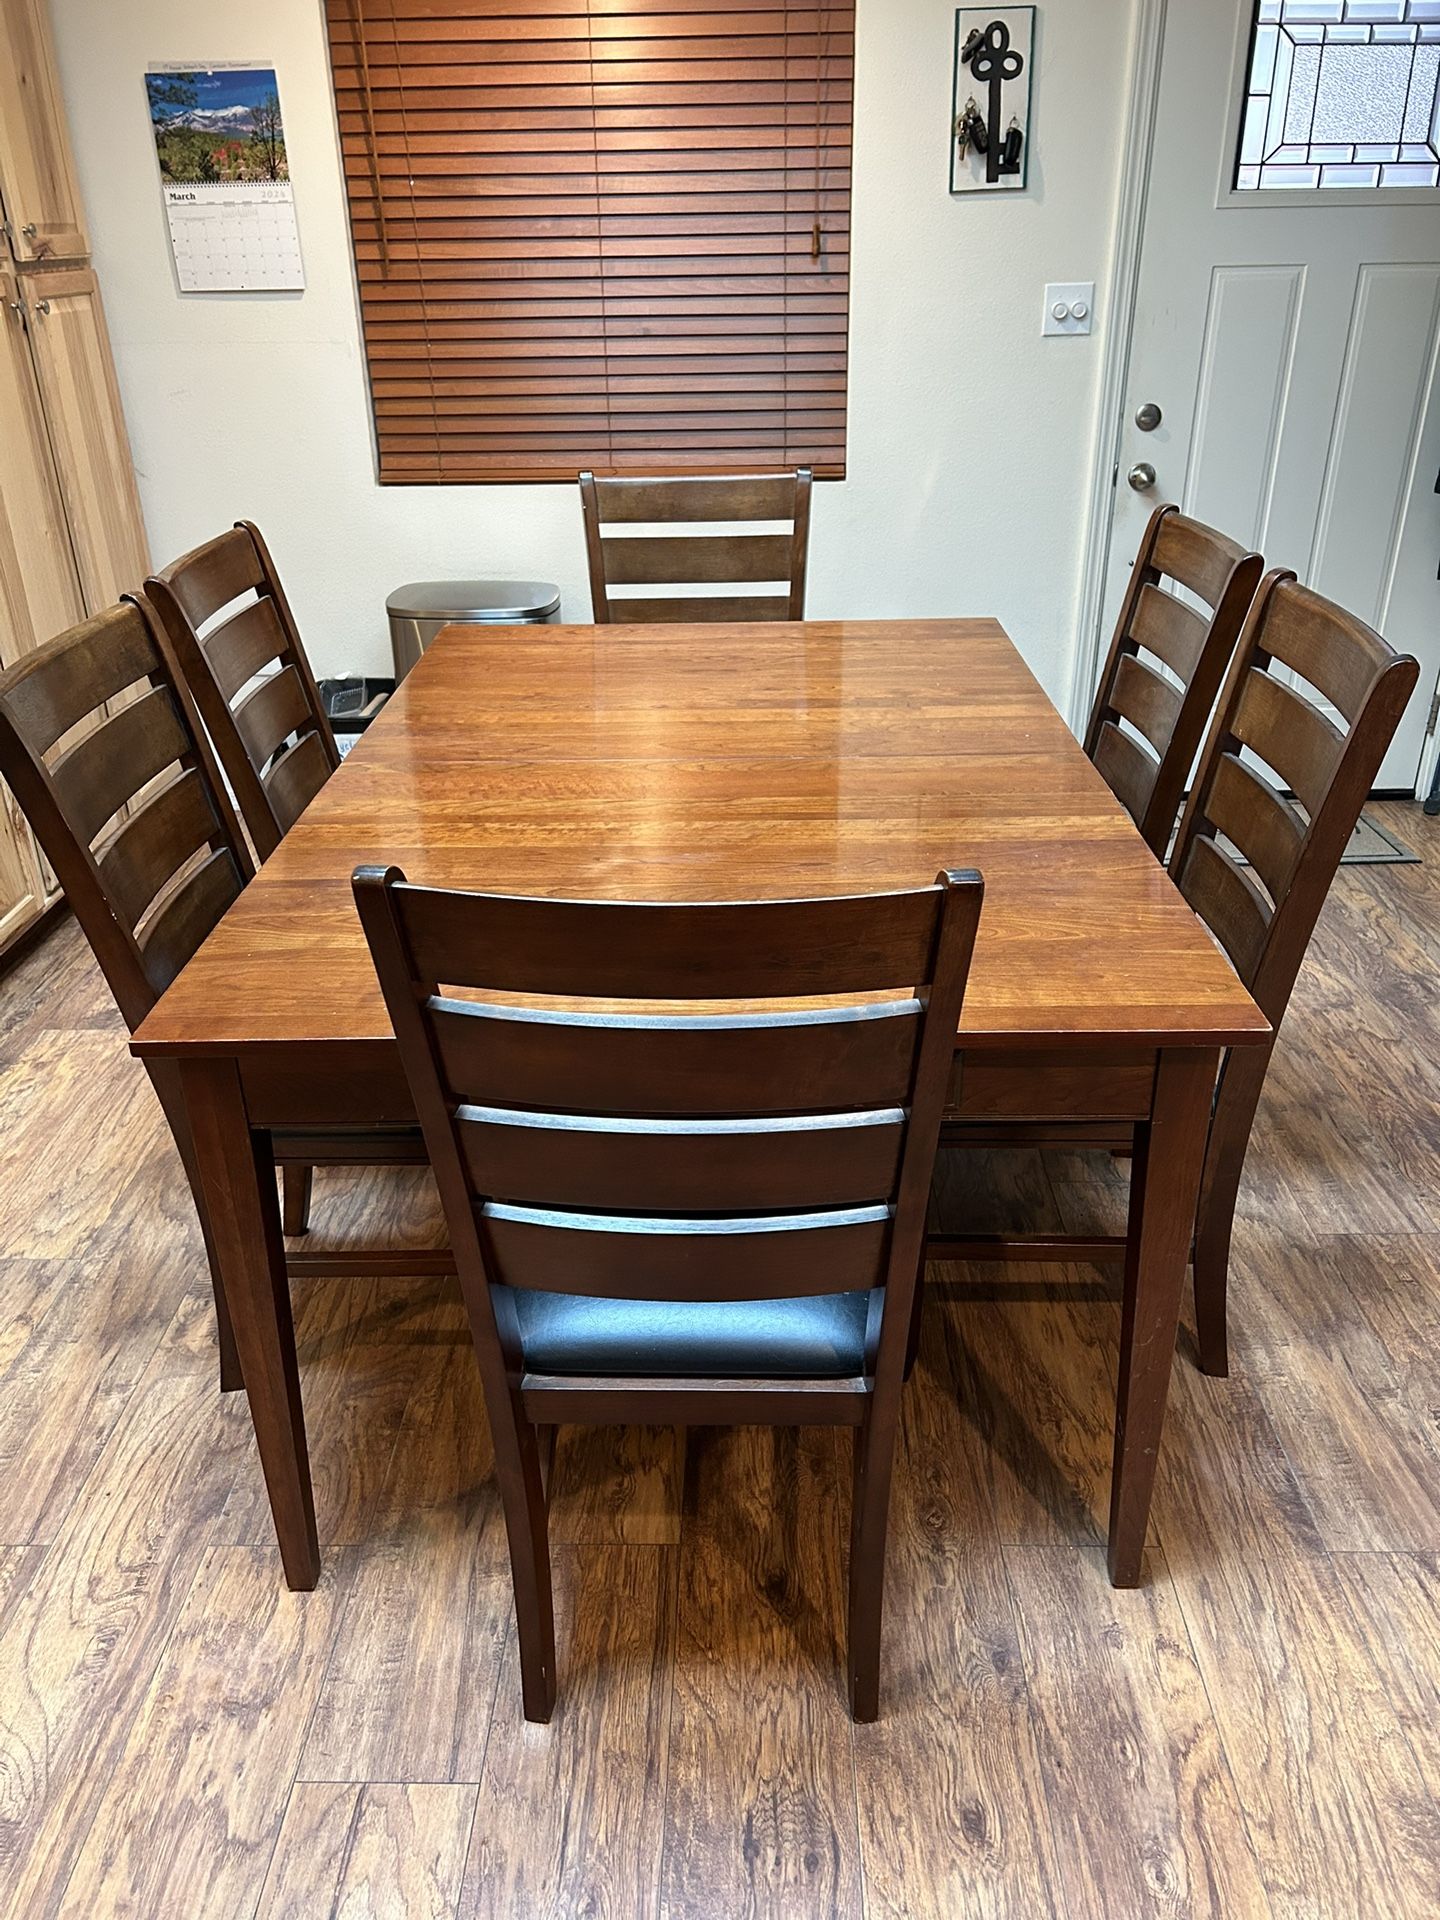 Ethan Allen Dining Table with Two Leaves & six chairs $140 OBO